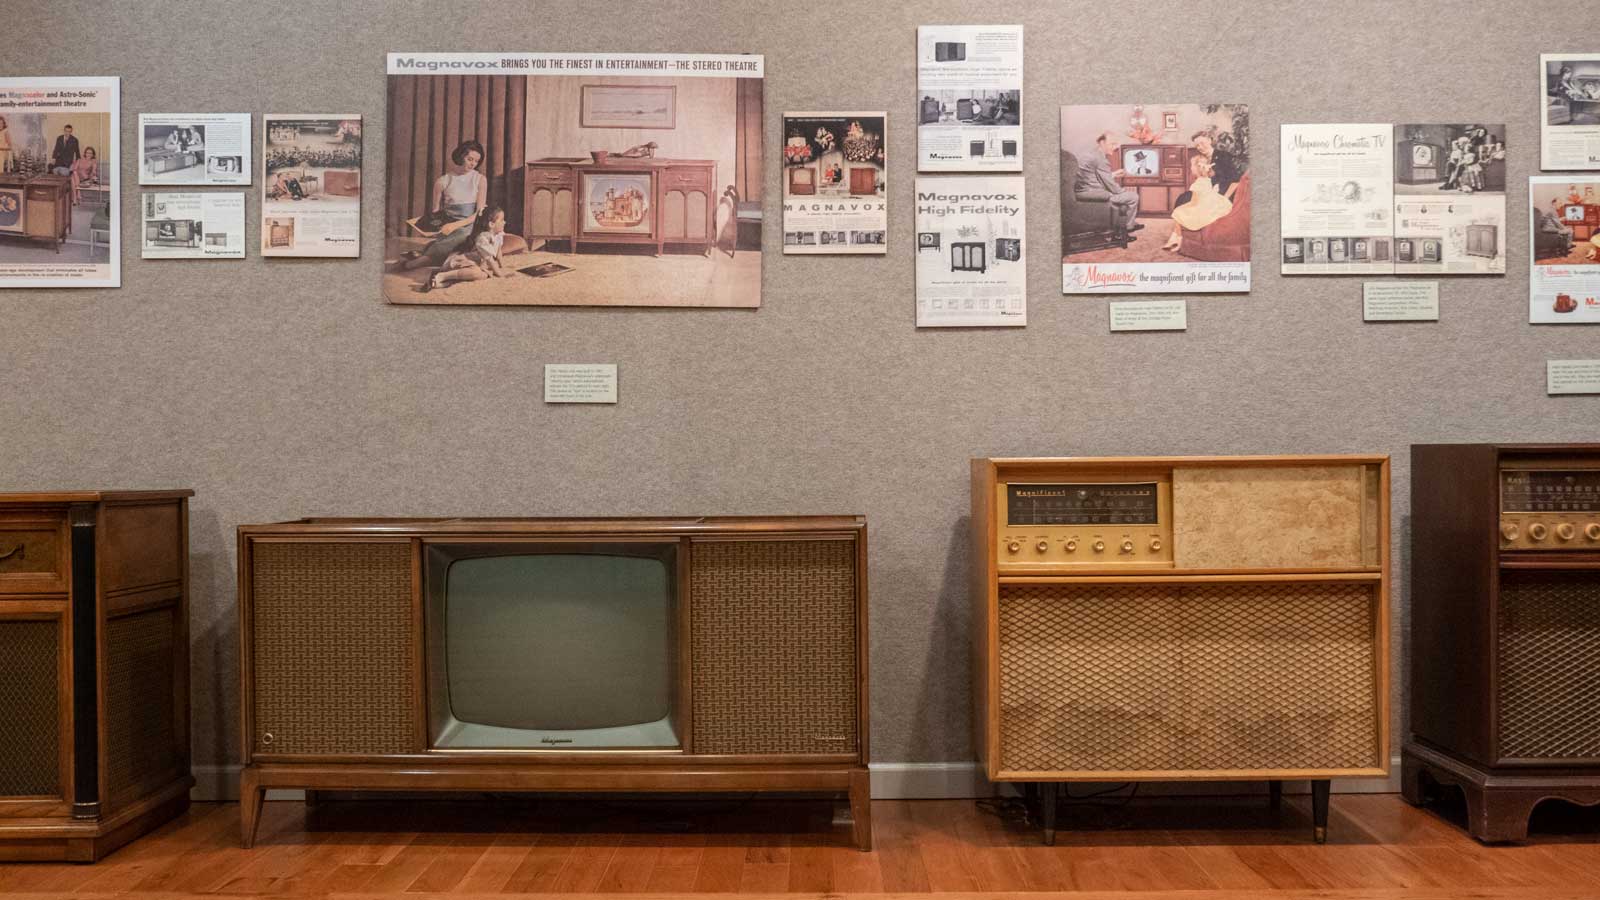 Magnavox exhibit at Greeneville Green County Museum Tennessee